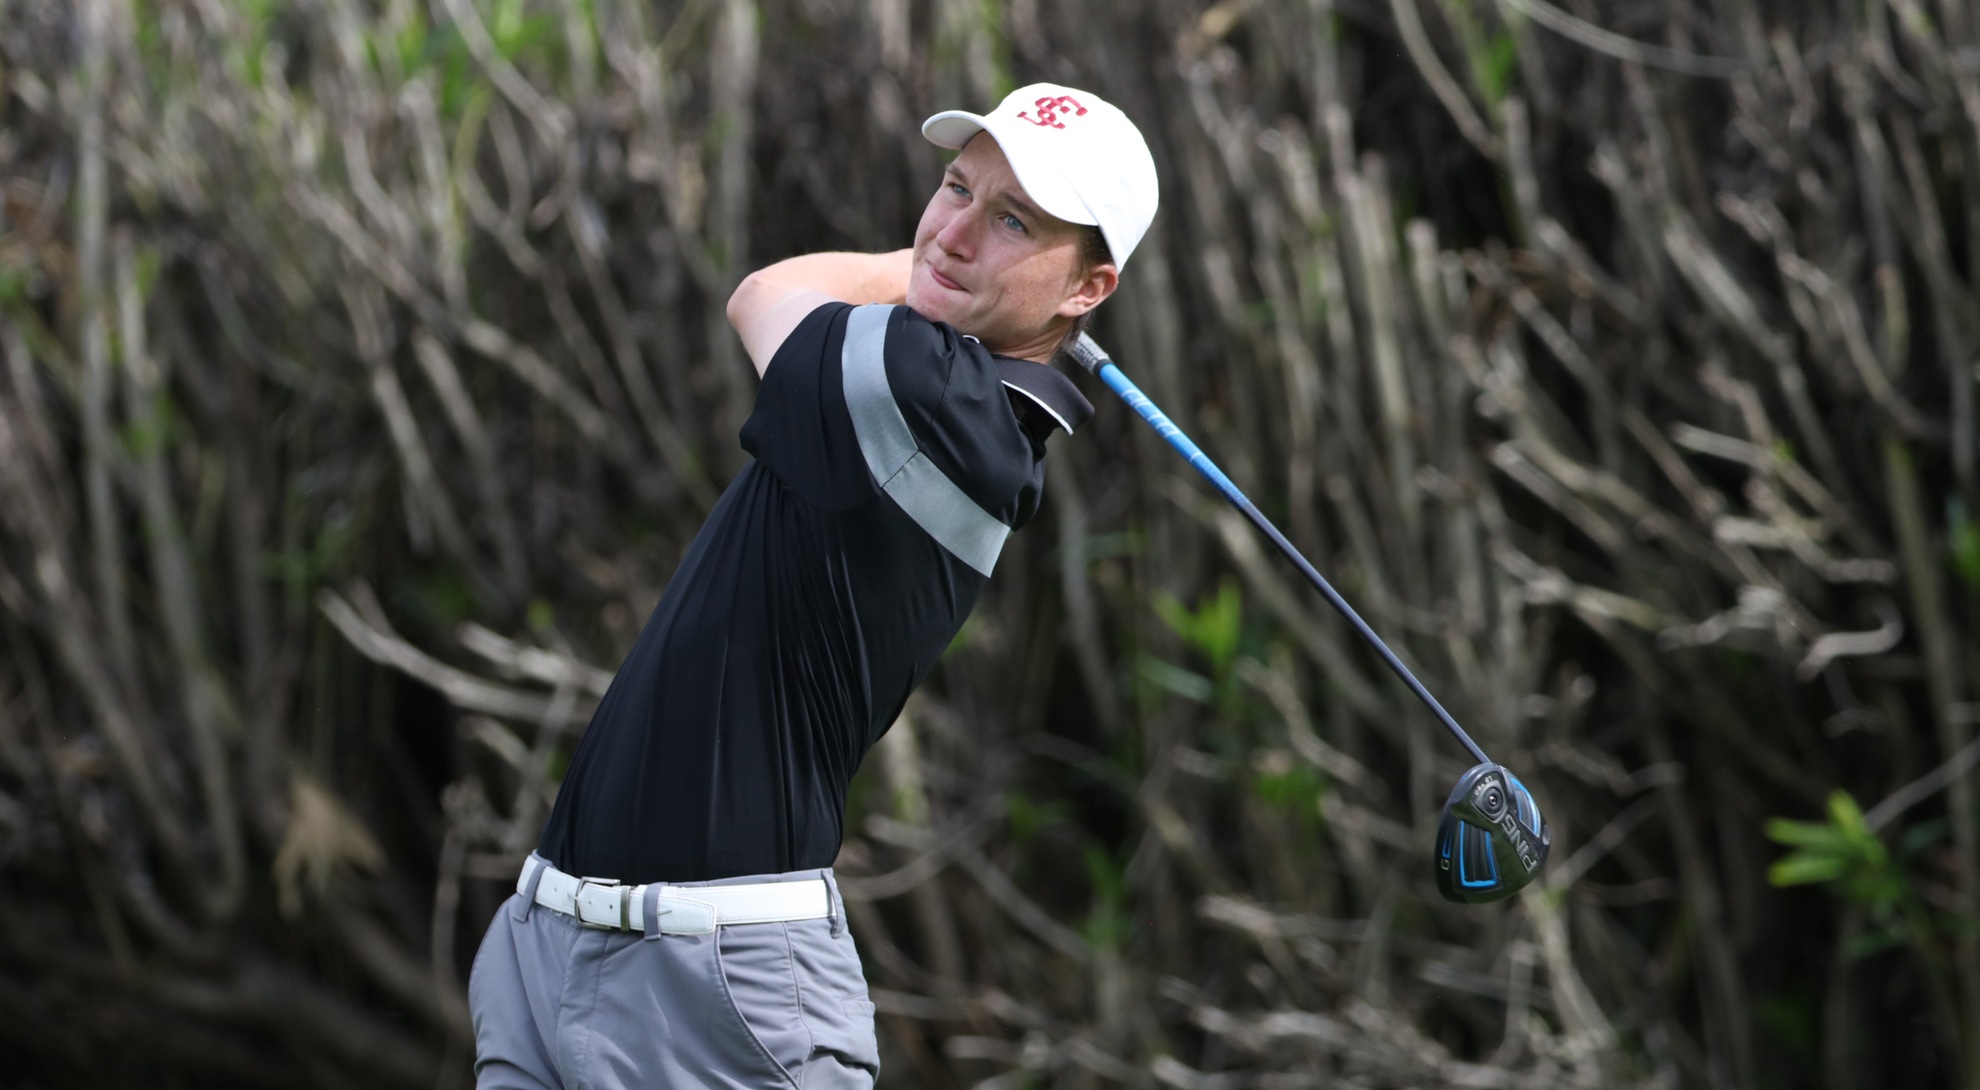 McCarty Leads Men’s Golf To Fifth Place Finish At Bandon Dunes Championship